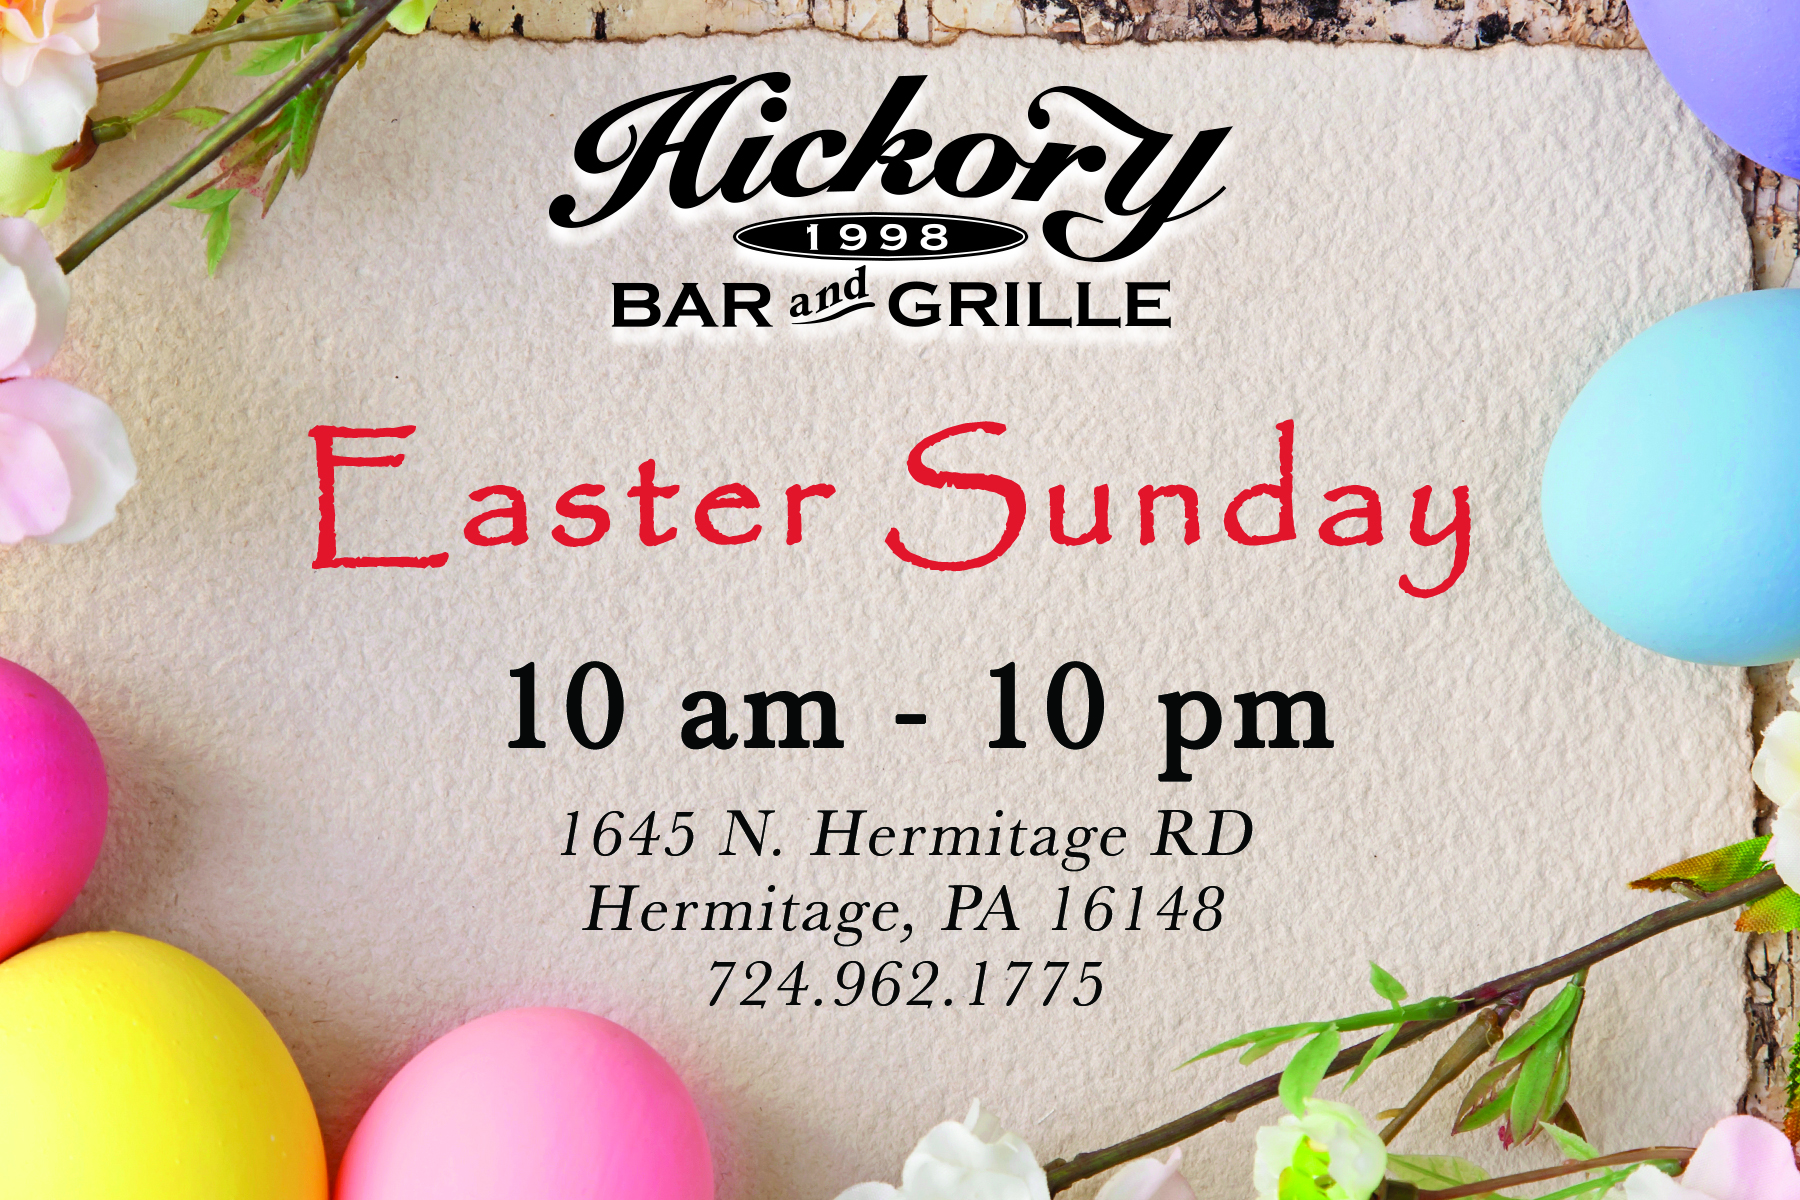 Sneak Peek at Easter Specials! - Hickory Bar & Grille - Hermitage, PA1800 x 1200